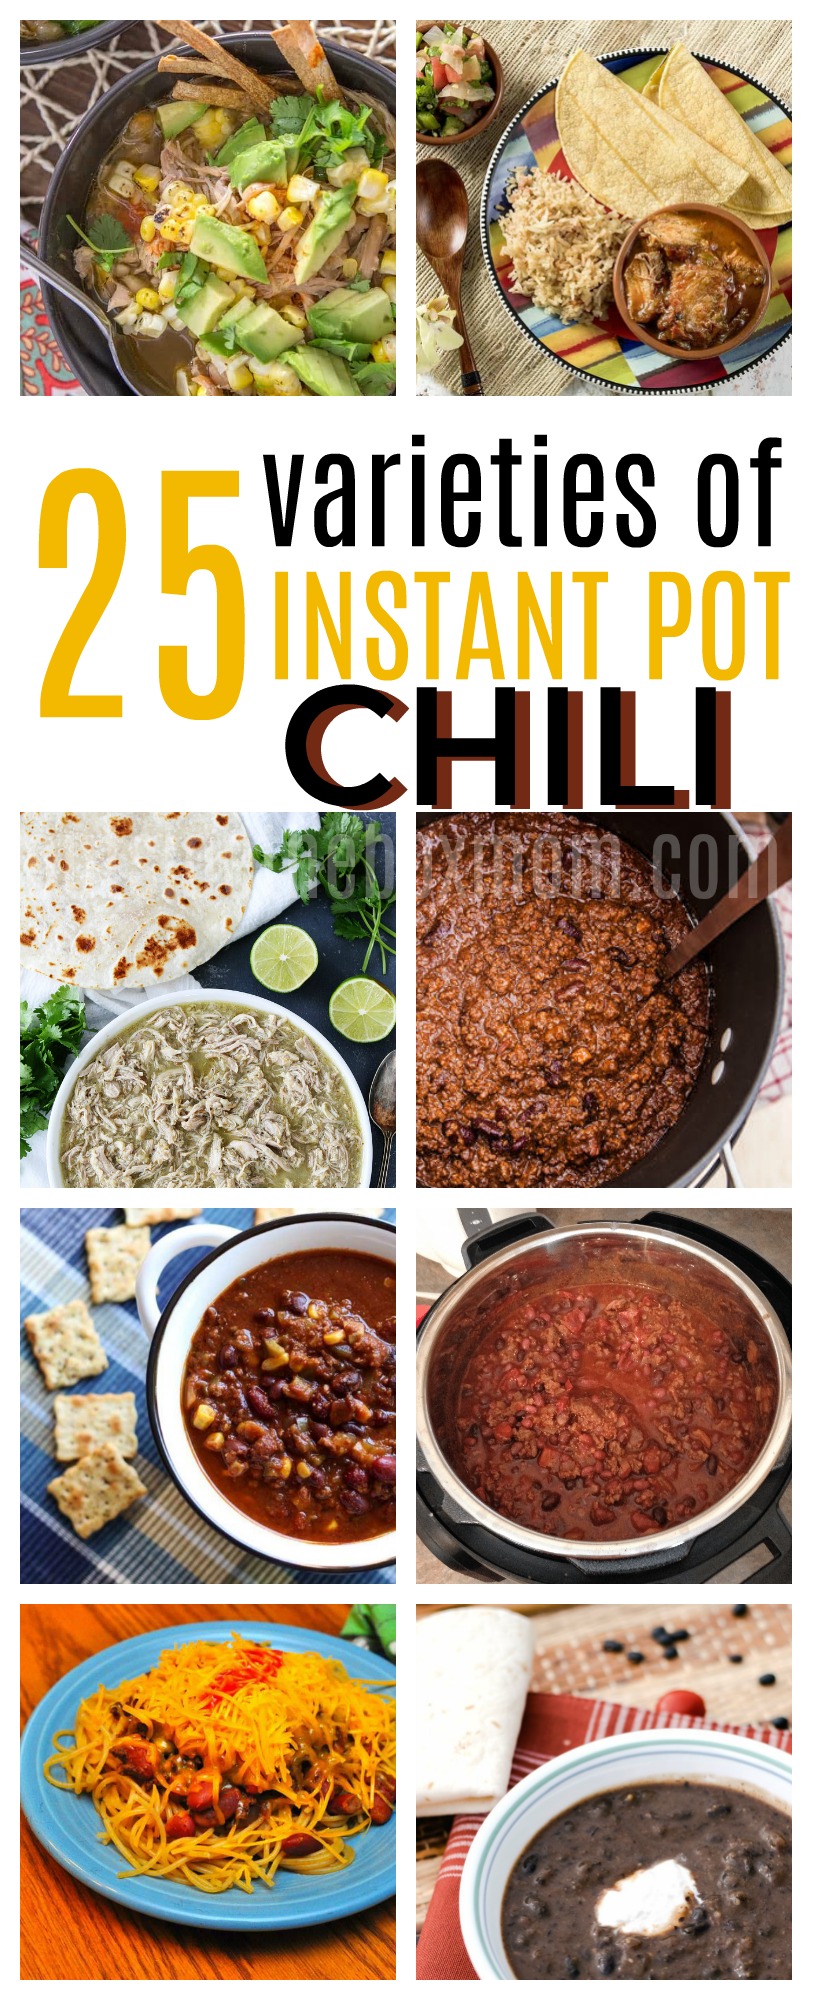 instant pot chili | These instant pot chili recipe options are 25 ways your Instant Pot can make tonight's dinner super easy.